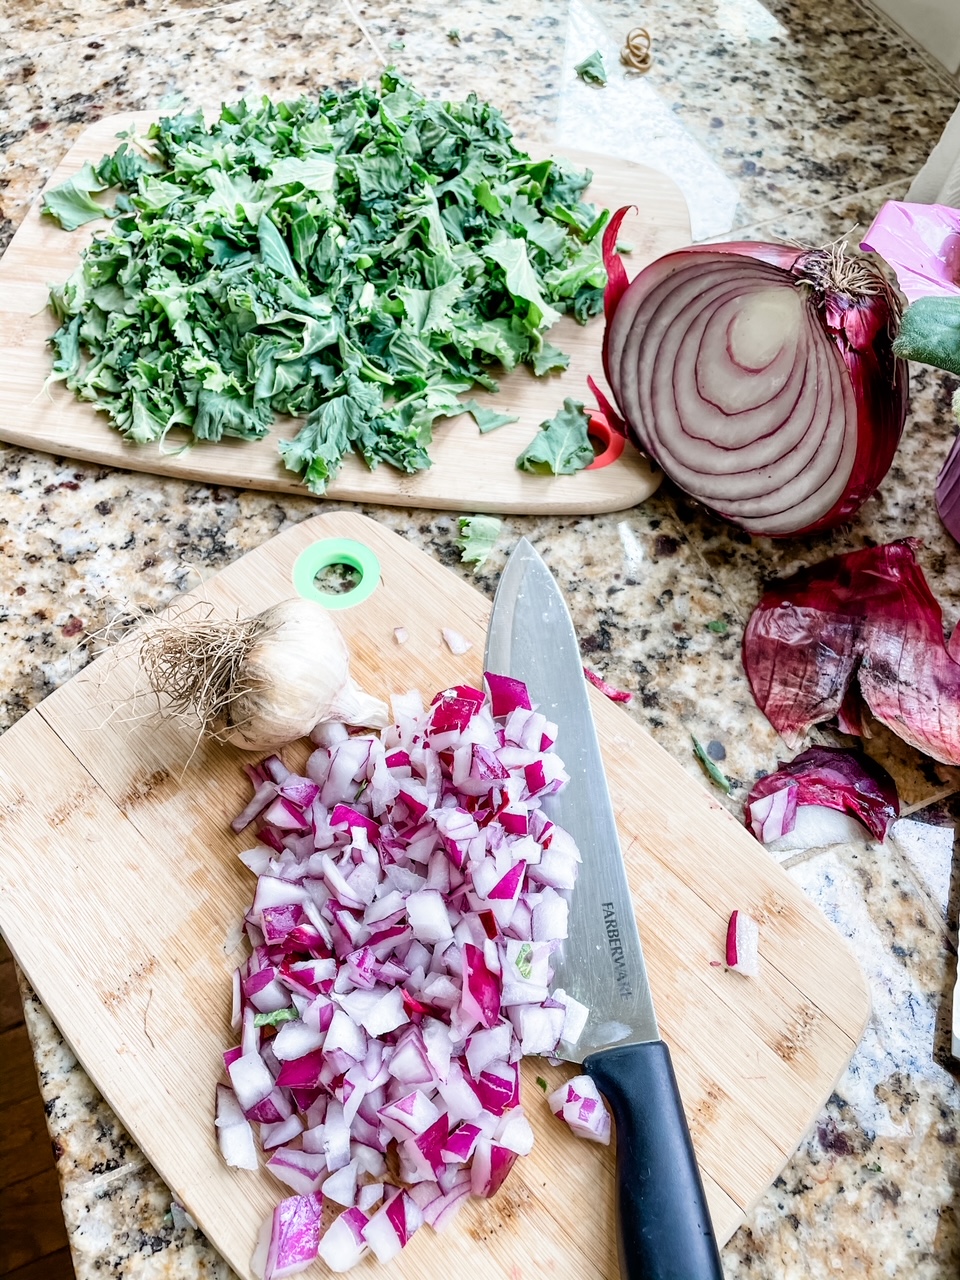 Chopped kale and red onion on a cutting board